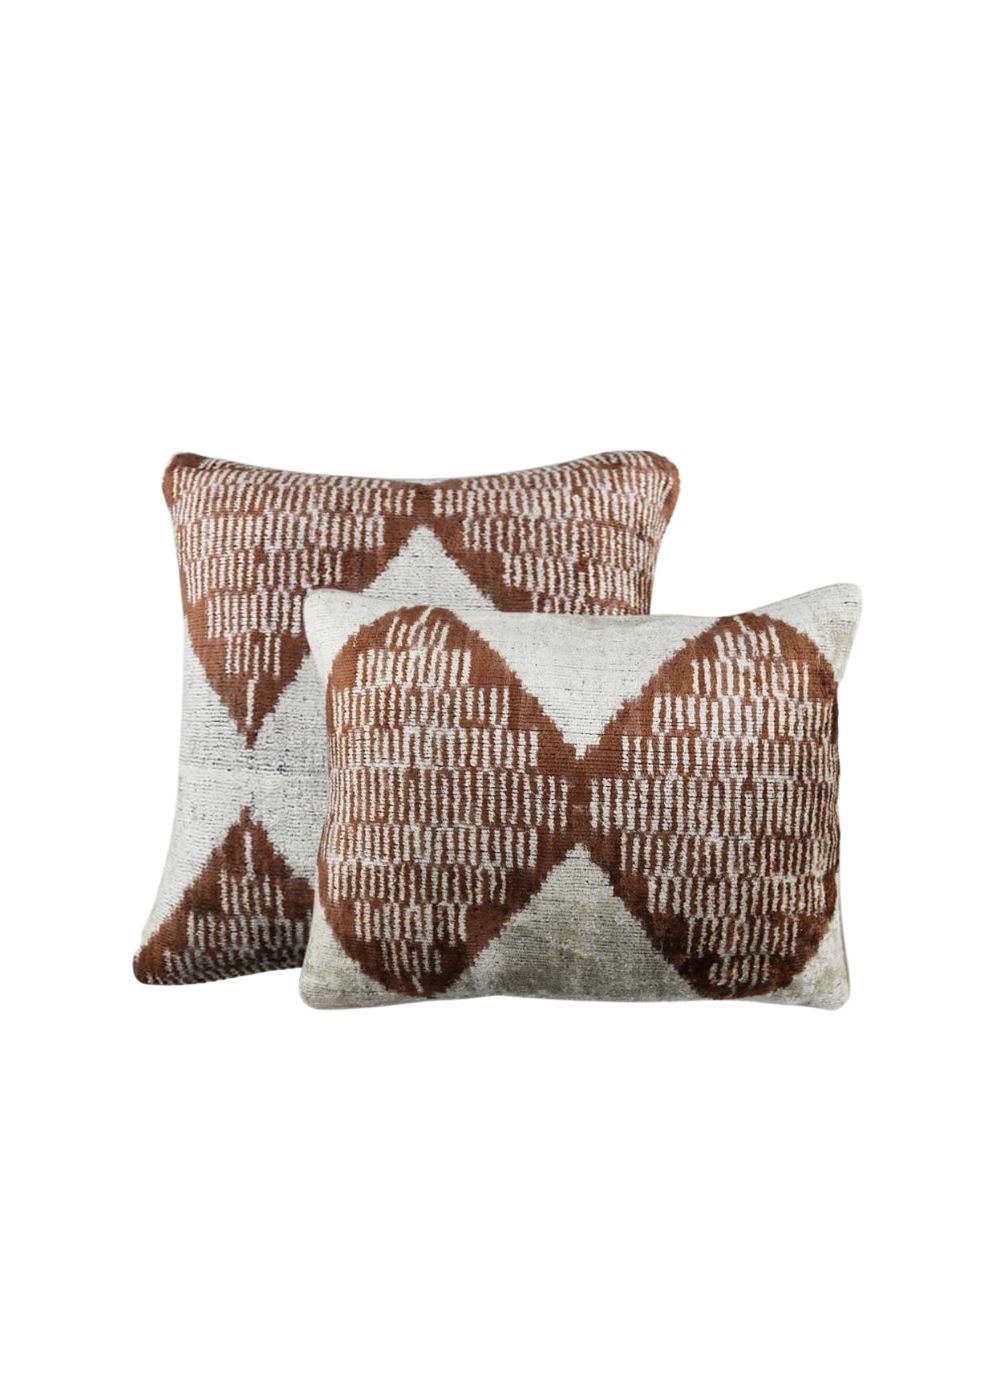 linden-pillows-both-sizes-combined-ZVPL-2103